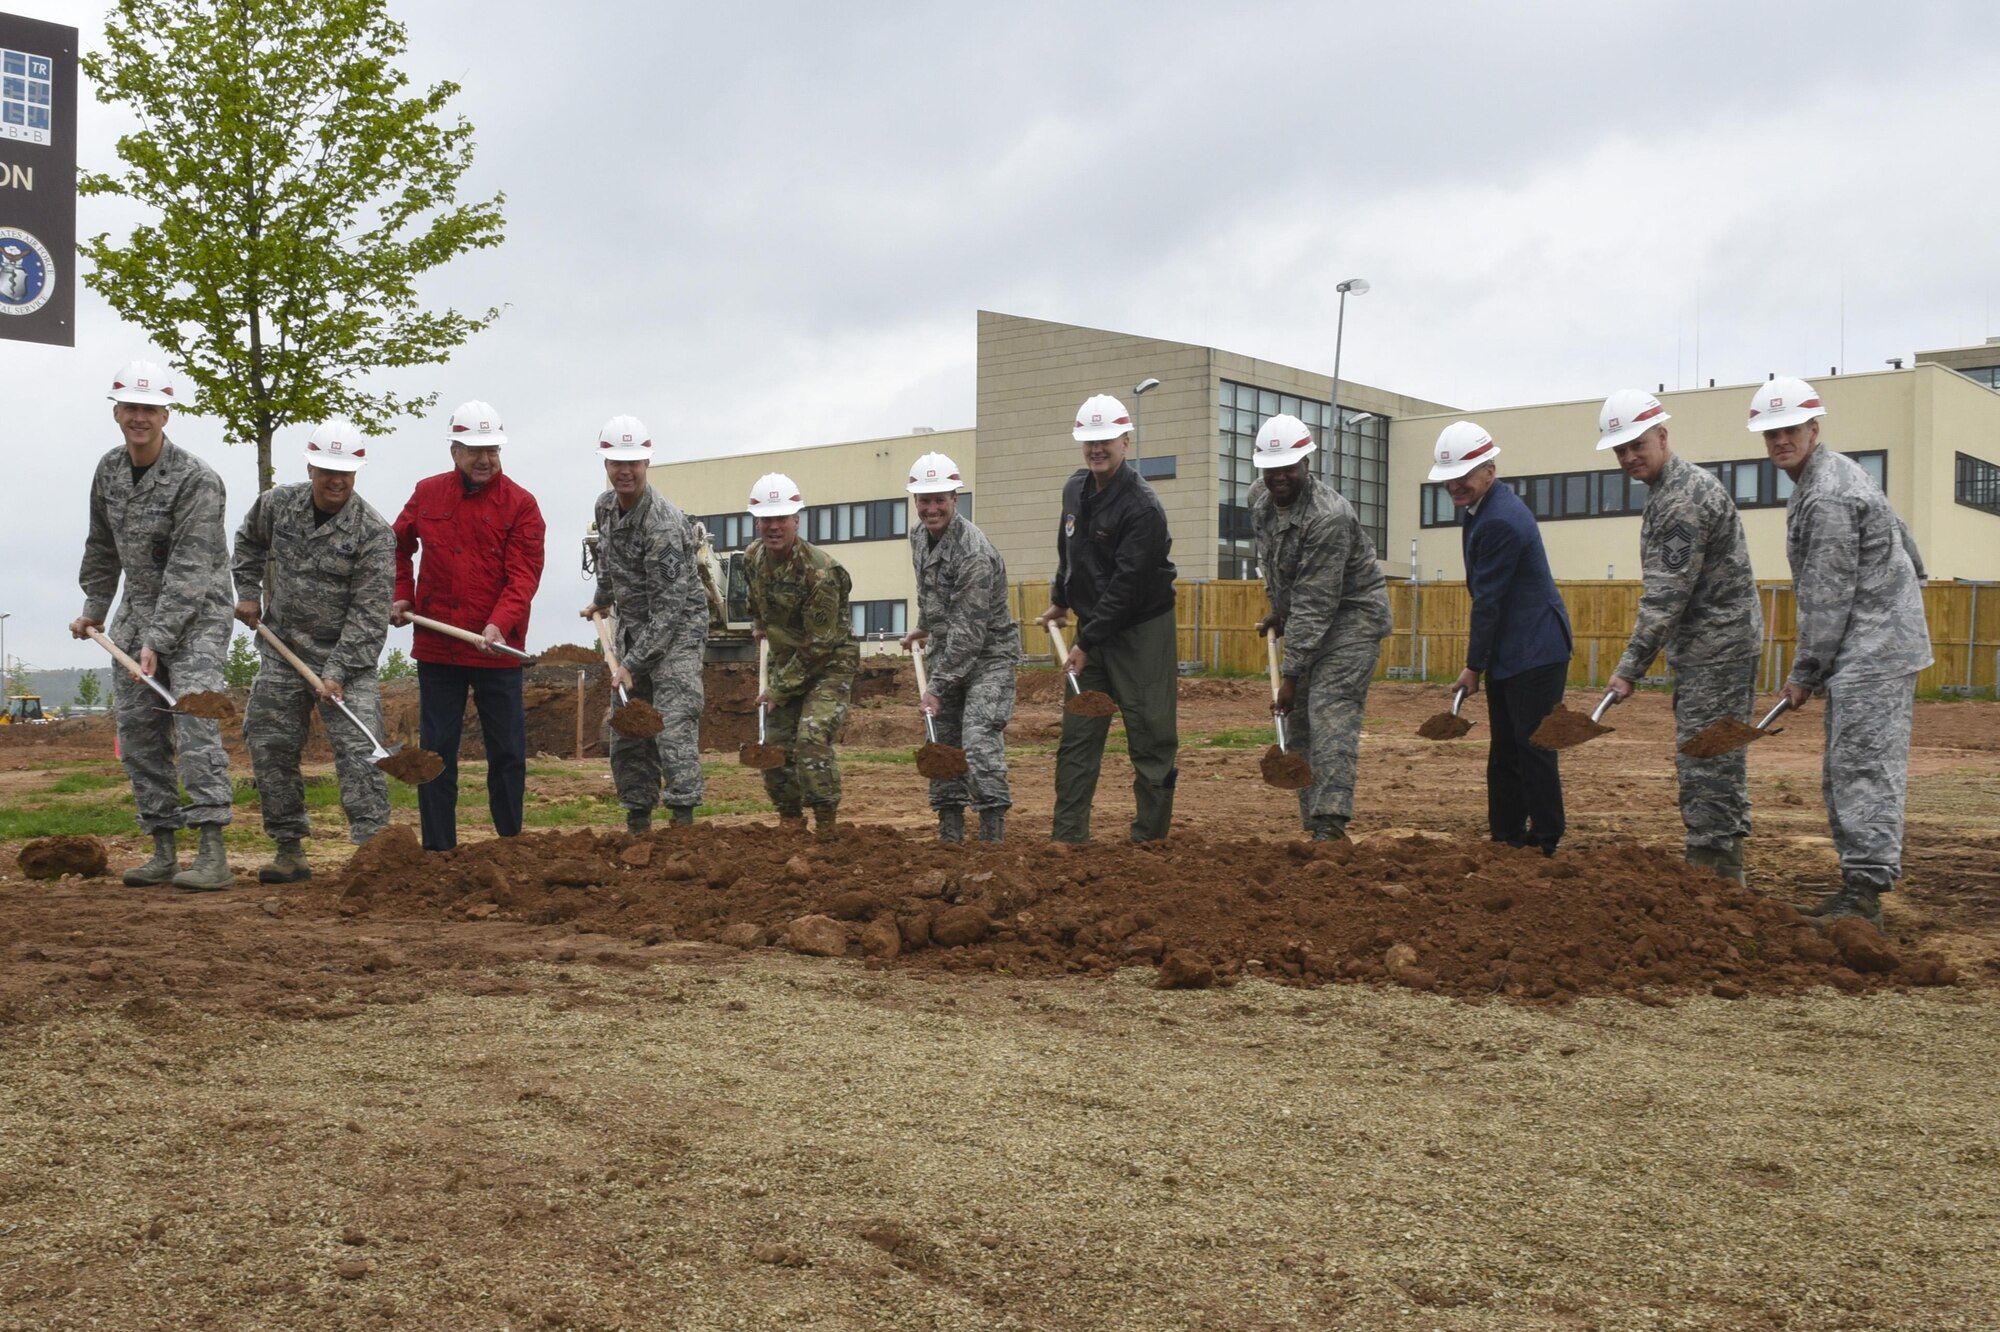 52nd Fighter Wing leadership, a U.S. Army Corps of Engineers representative and local government and construction officials participated in a ground breaking ceremony at the site of the Military Treatment Facility expansion on Spangdahlem Air Base, Germany, May 12, 2017. The ceremony created an opportunity to bring together and recognize all the organizations responsible for the $34 million, 54,000-square-foot project. (U.S. Air Force photo by Senior Airman Dawn M. Weber)